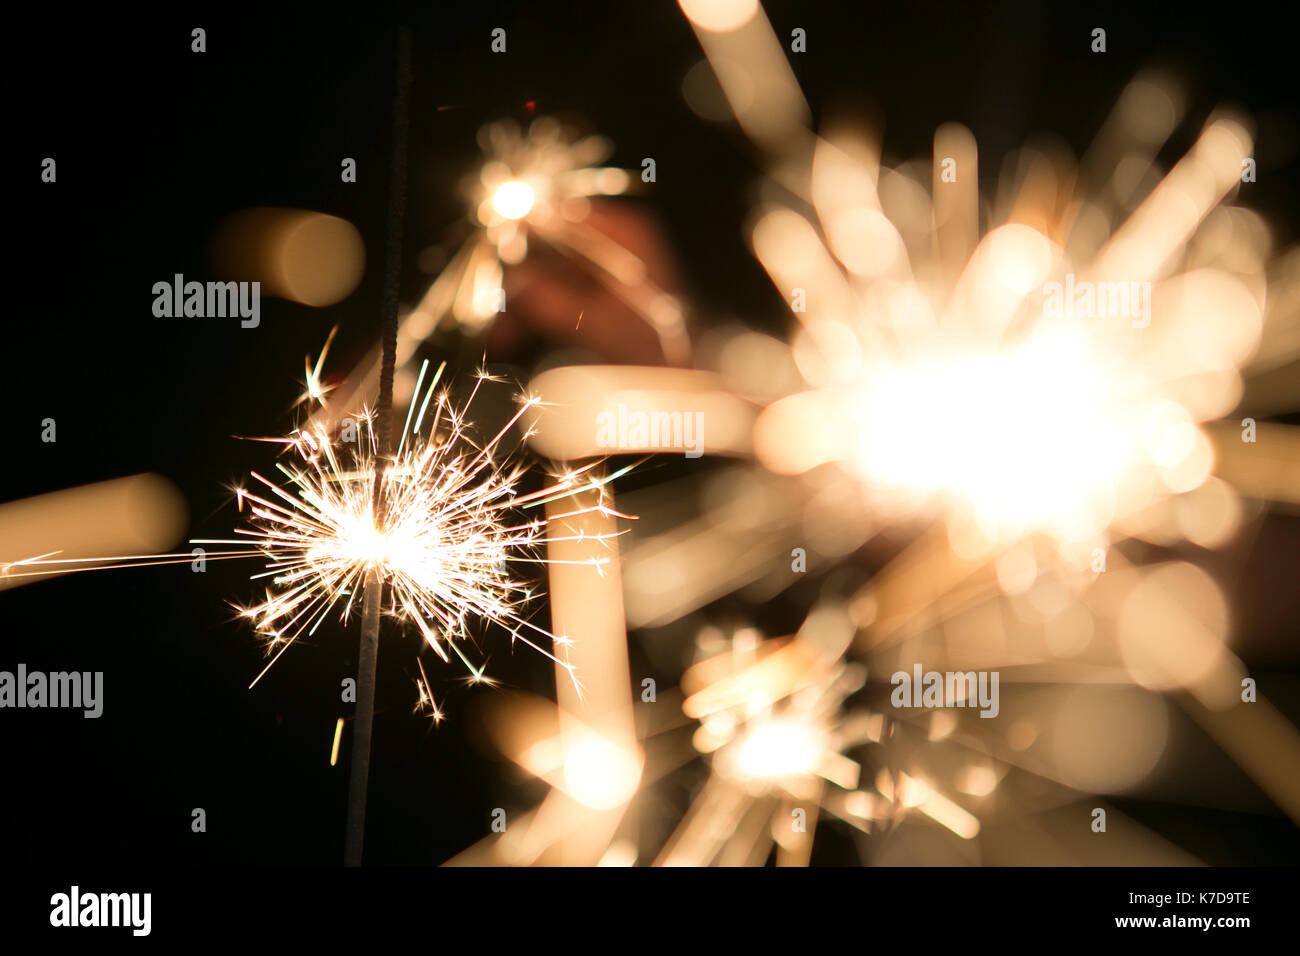 Blurred motion of glowing sparklers at night Stock Photo